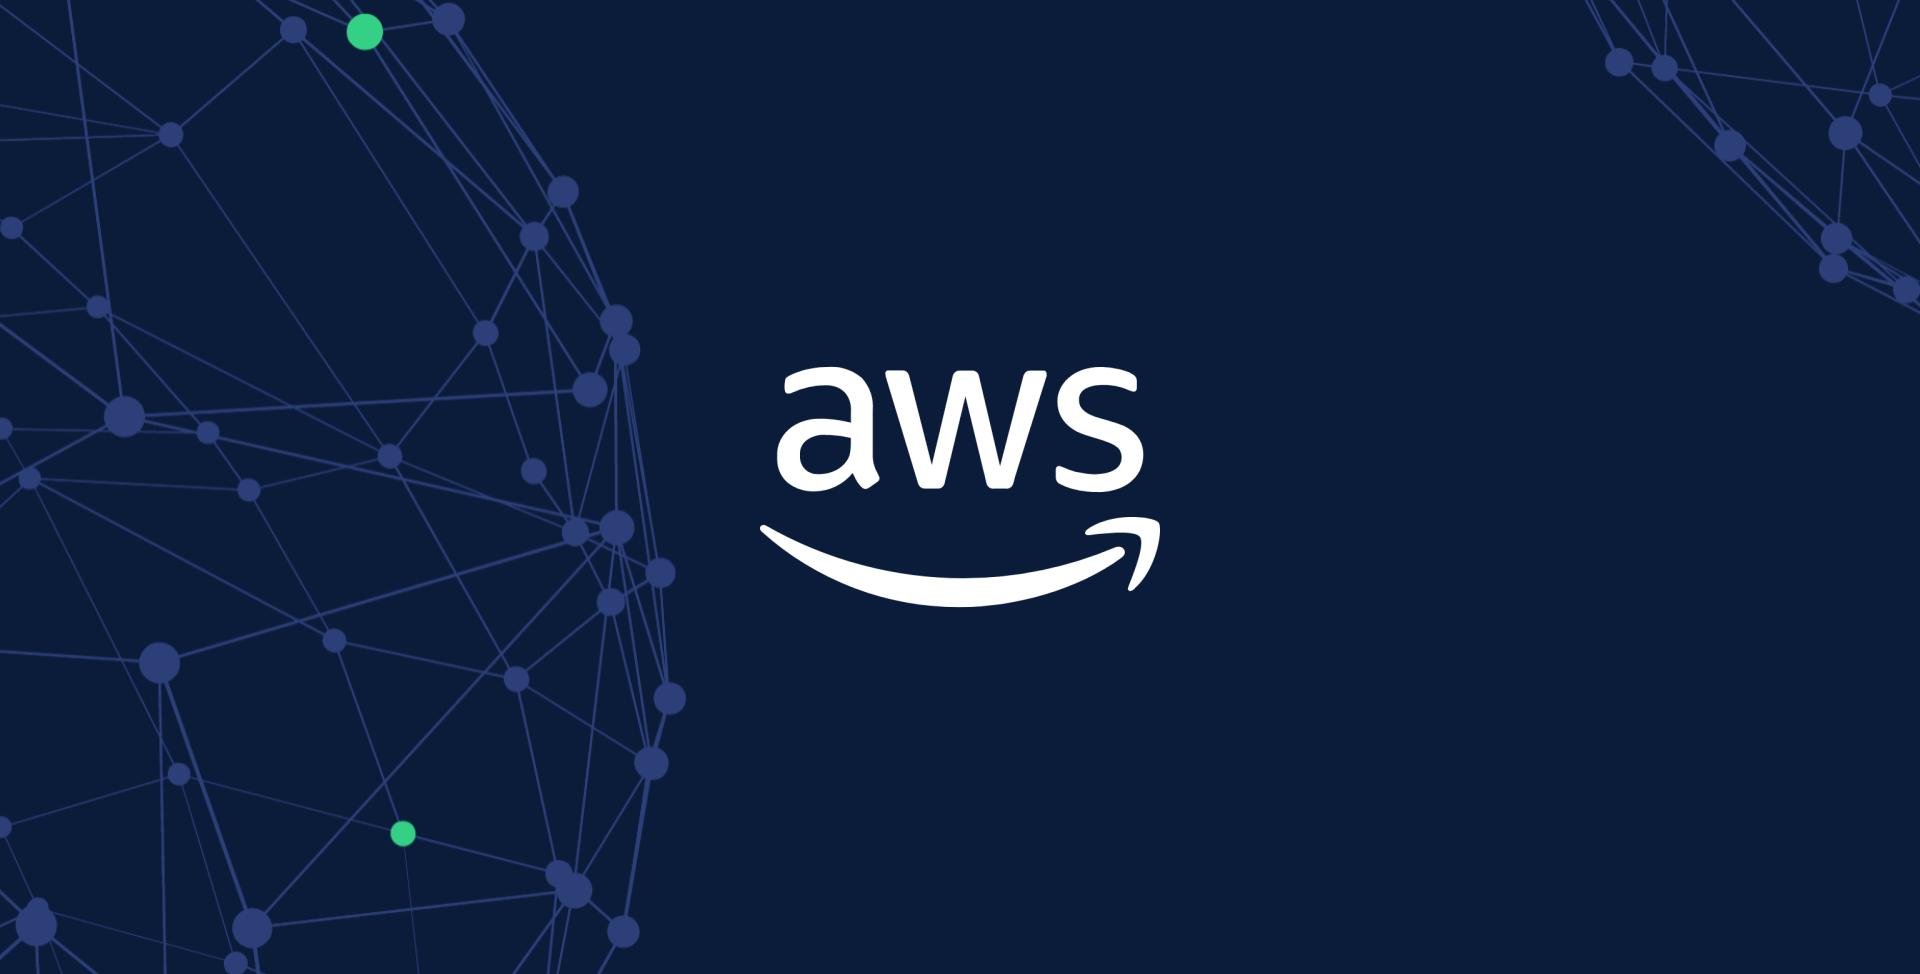 Load Testing AWS SQS with Gatling